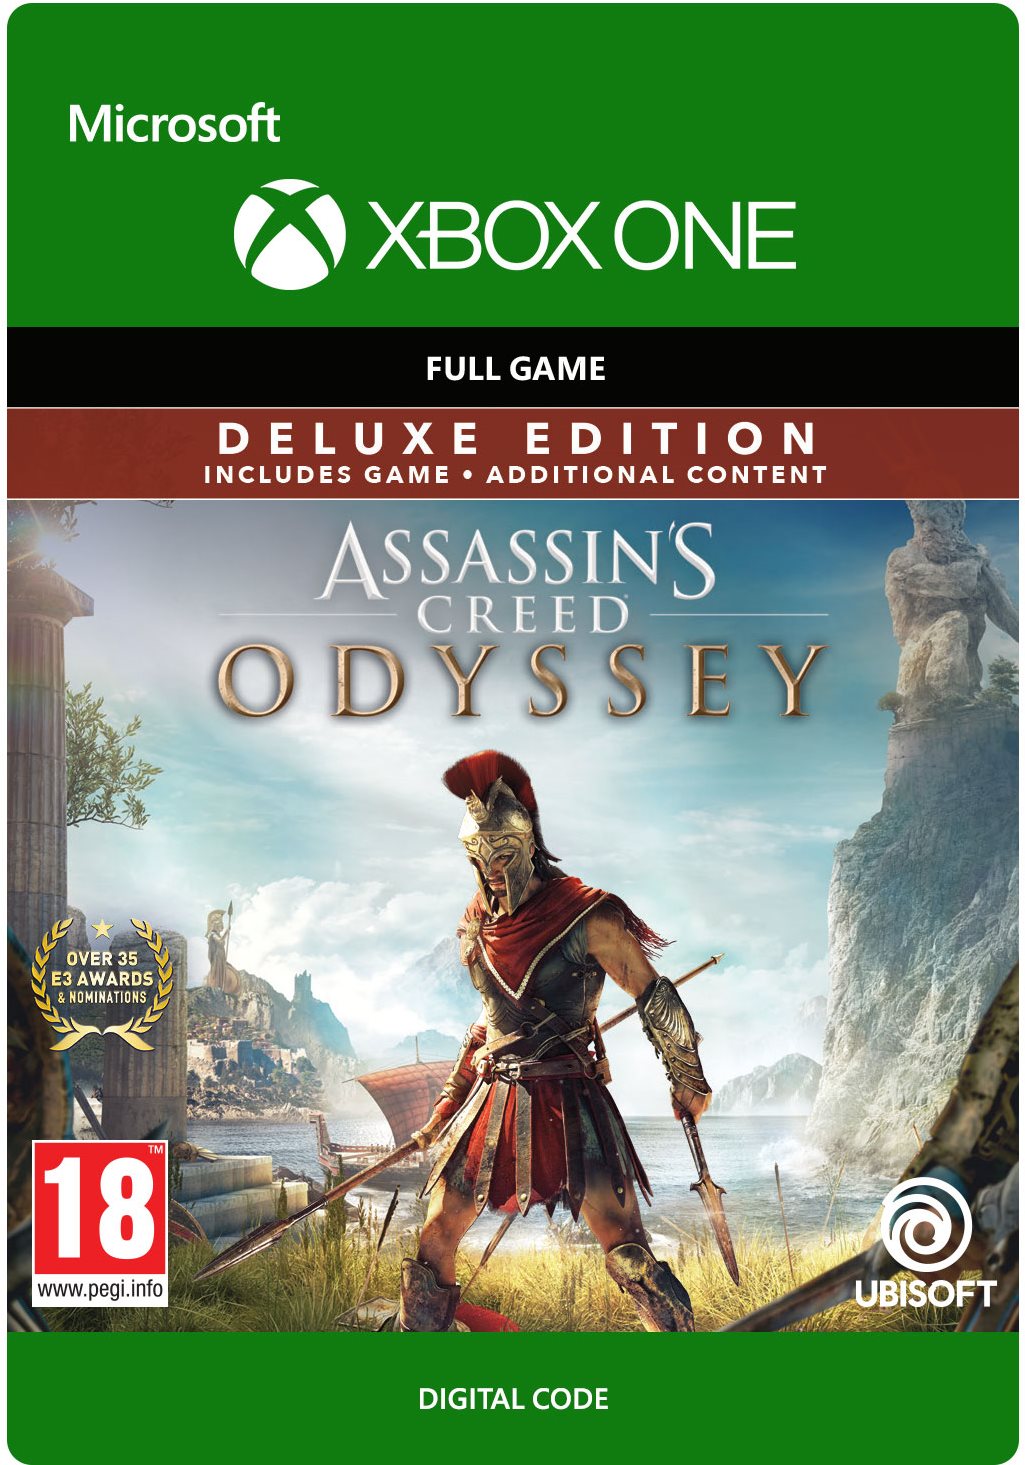 Assassin's Creed Odyssey Deluxe Edition - Xbox DIGITAL